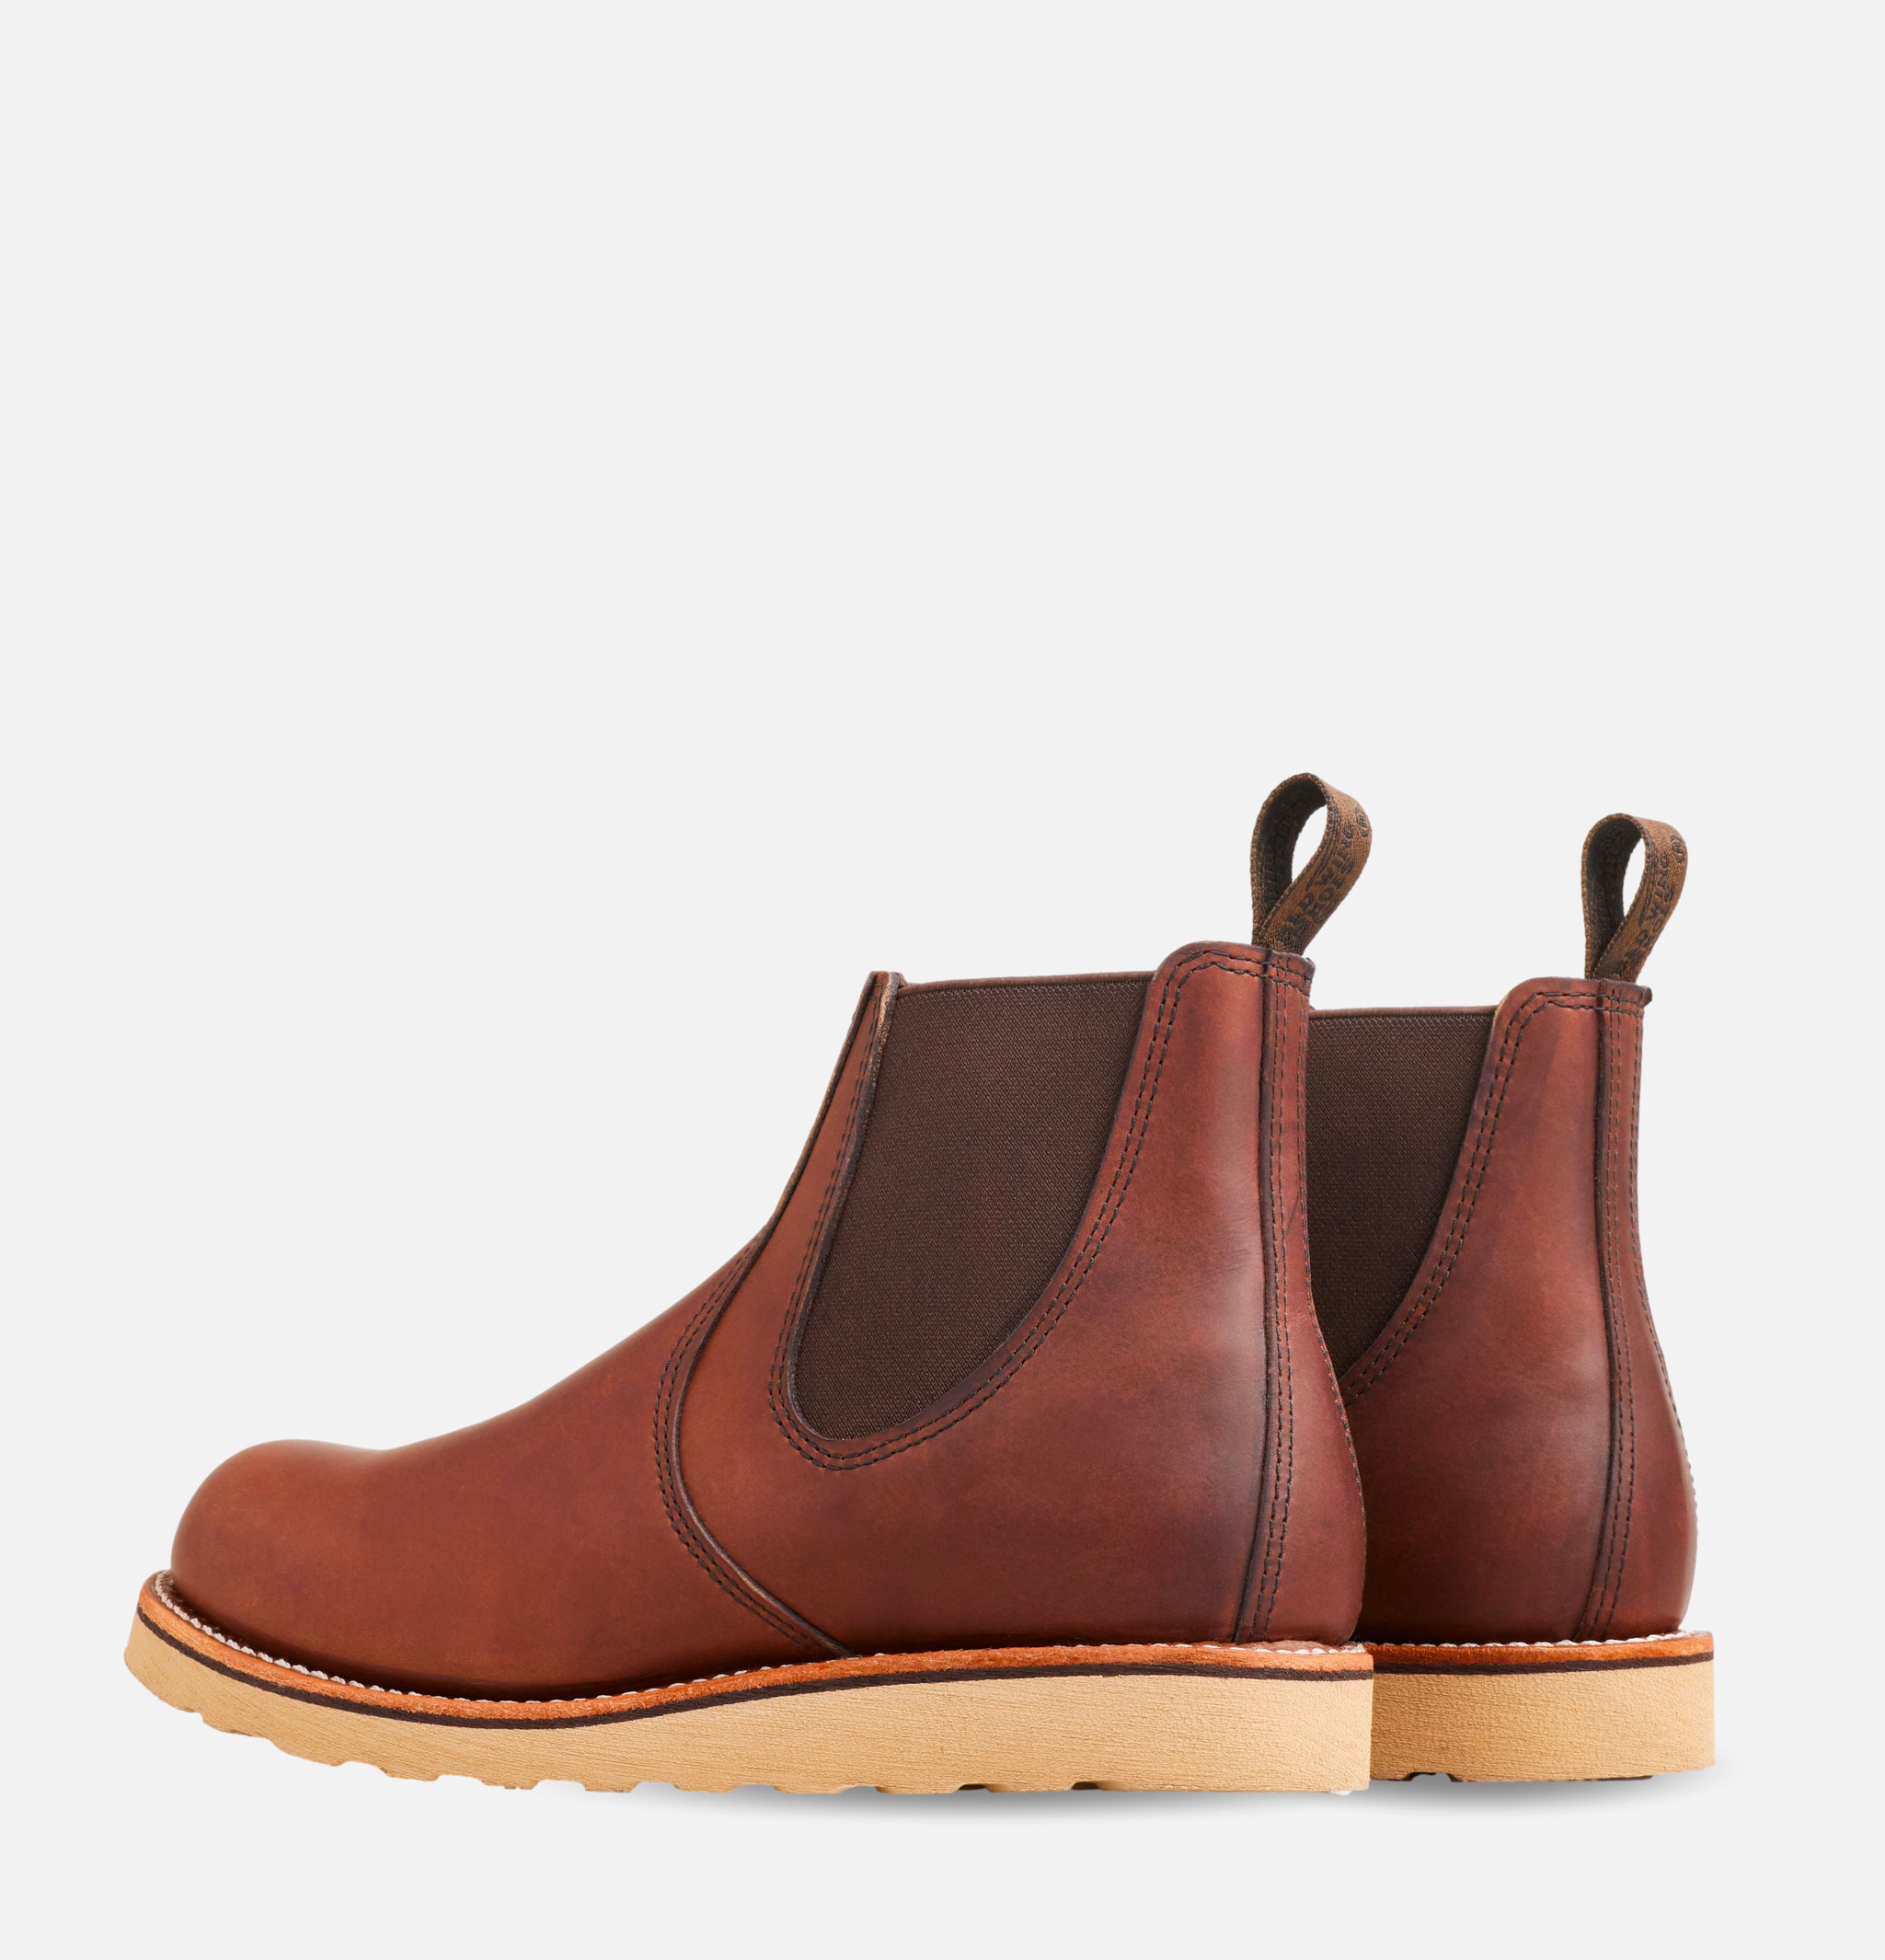 Red Wing Shoes - 3190 - Classic Chelsea Boots - Amber Harness